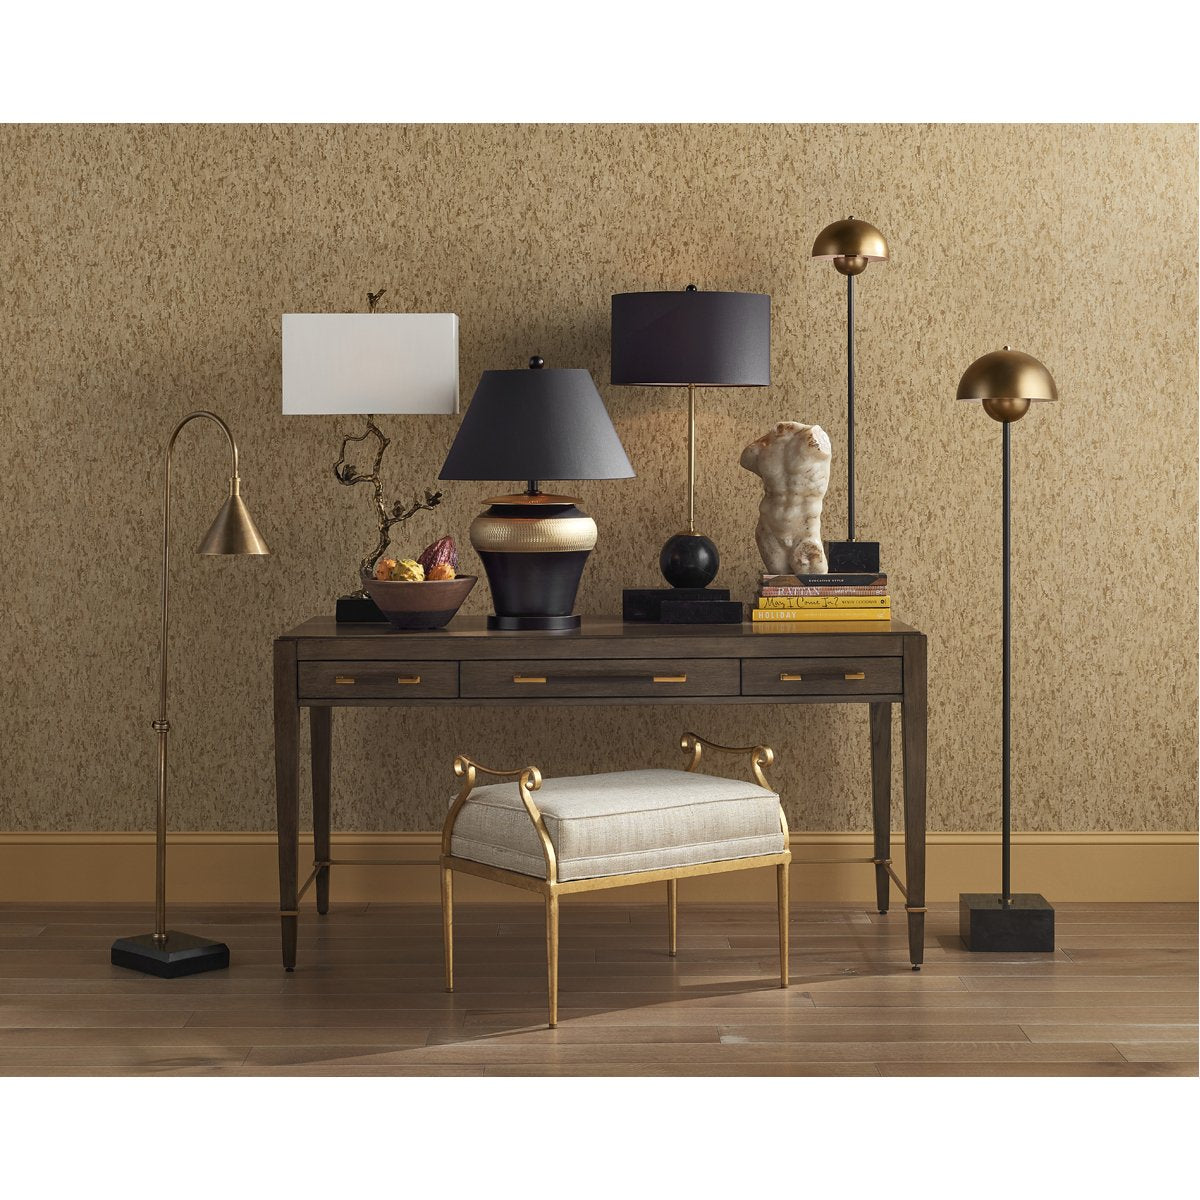 Currey and Company Vision Floor Lamp